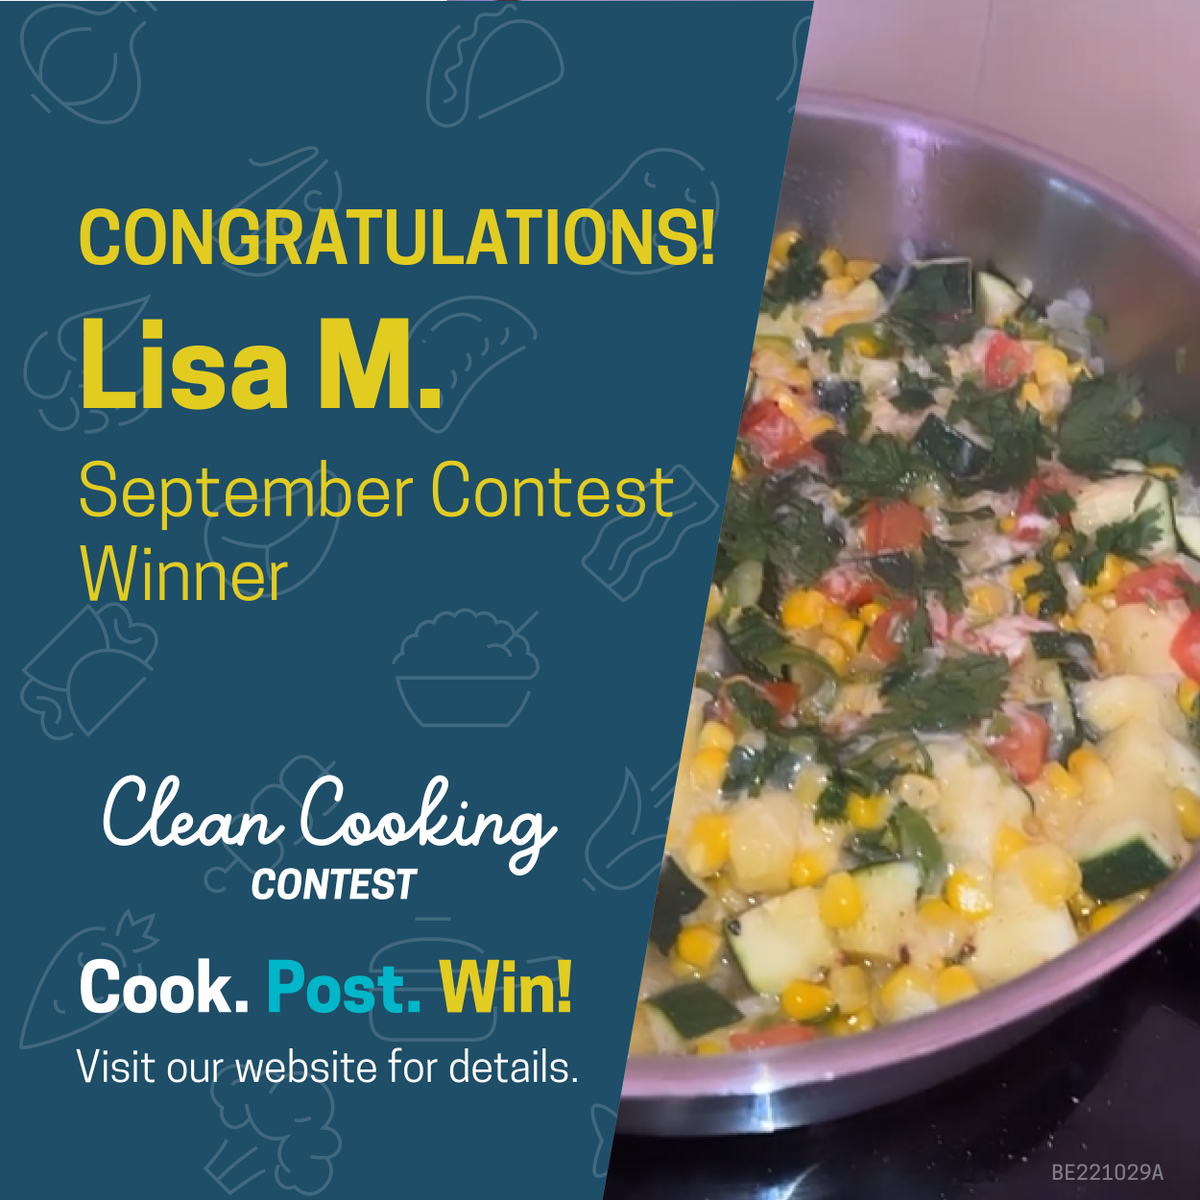 Congratulations to Lisa M. for winning last month’s Clean Cooking Contest! They won with their simmered summer vegetables! Join our celebration of squash in this month’s Clean Cooking Contest! Learn more here: ow.ly/jtiK50PUMNE